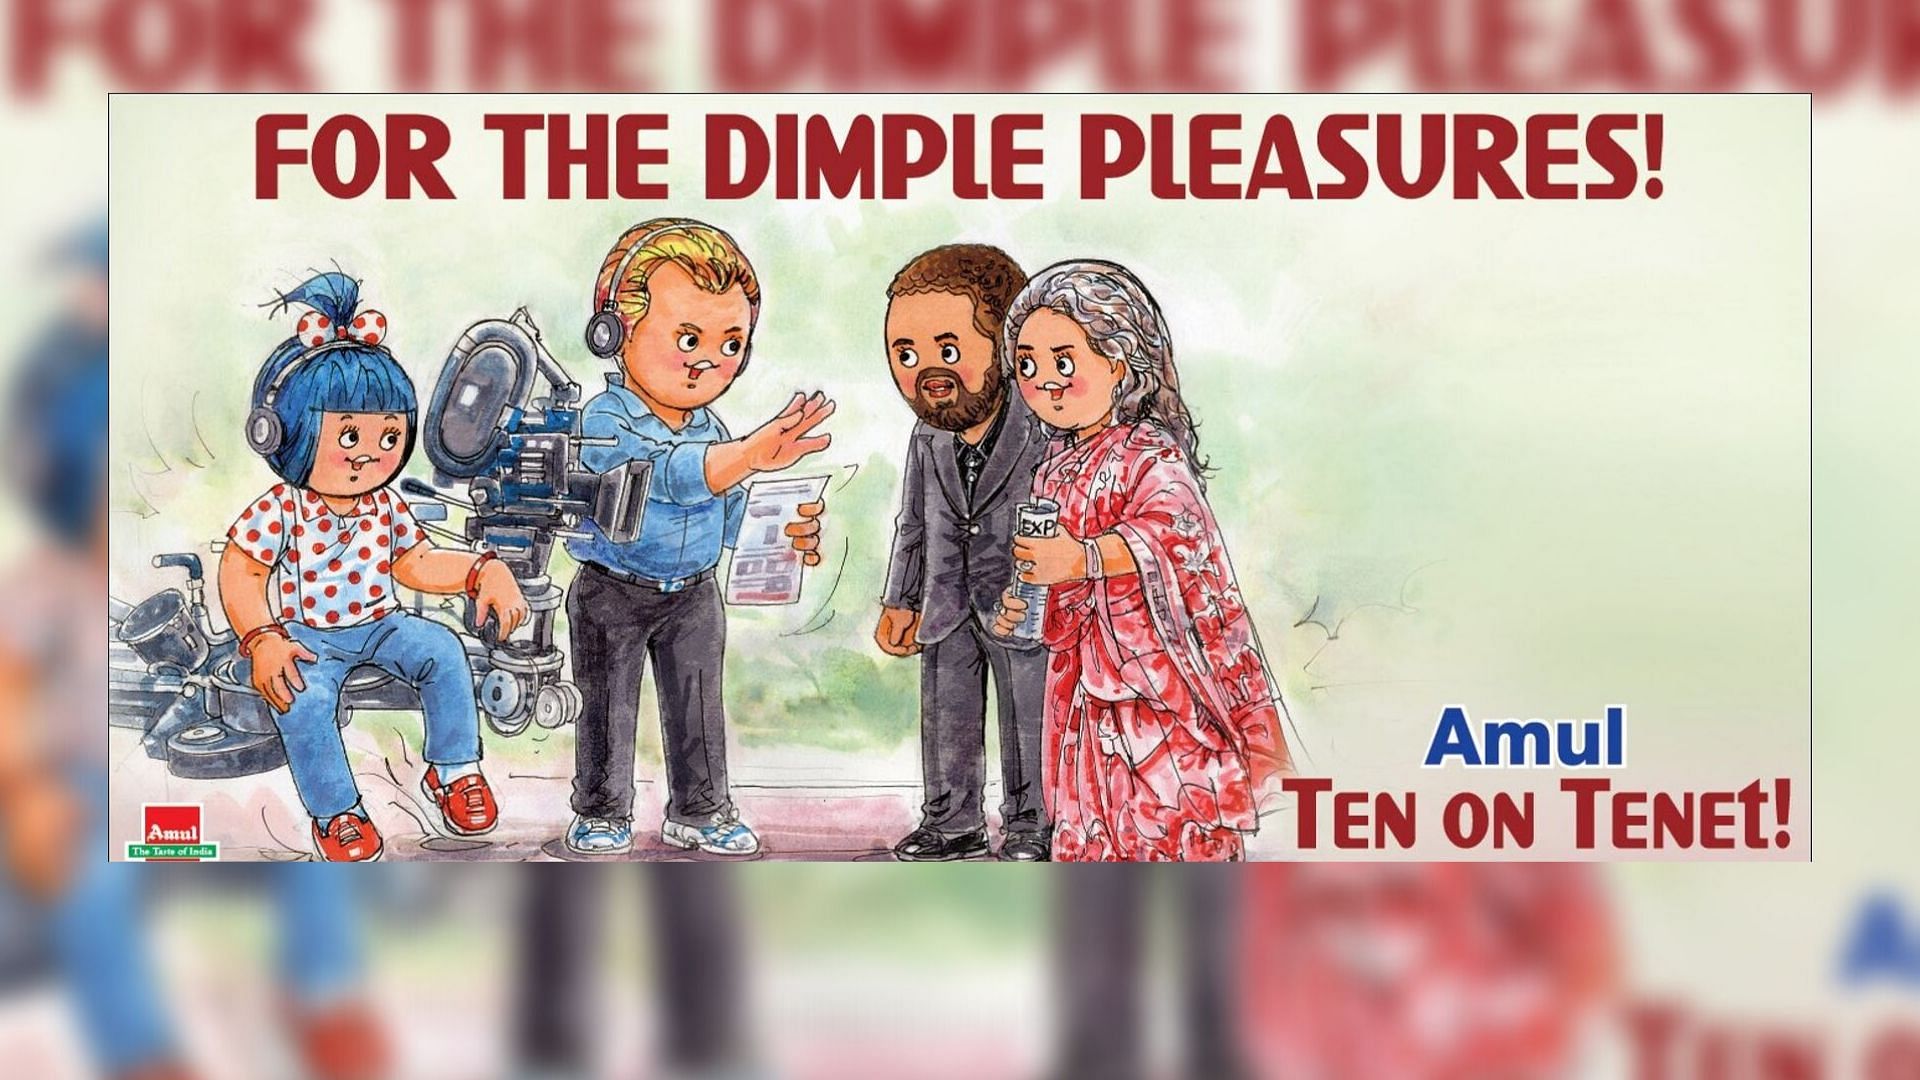 Amul has come up with an ad on Christopher Nolan shooting in Mumbai